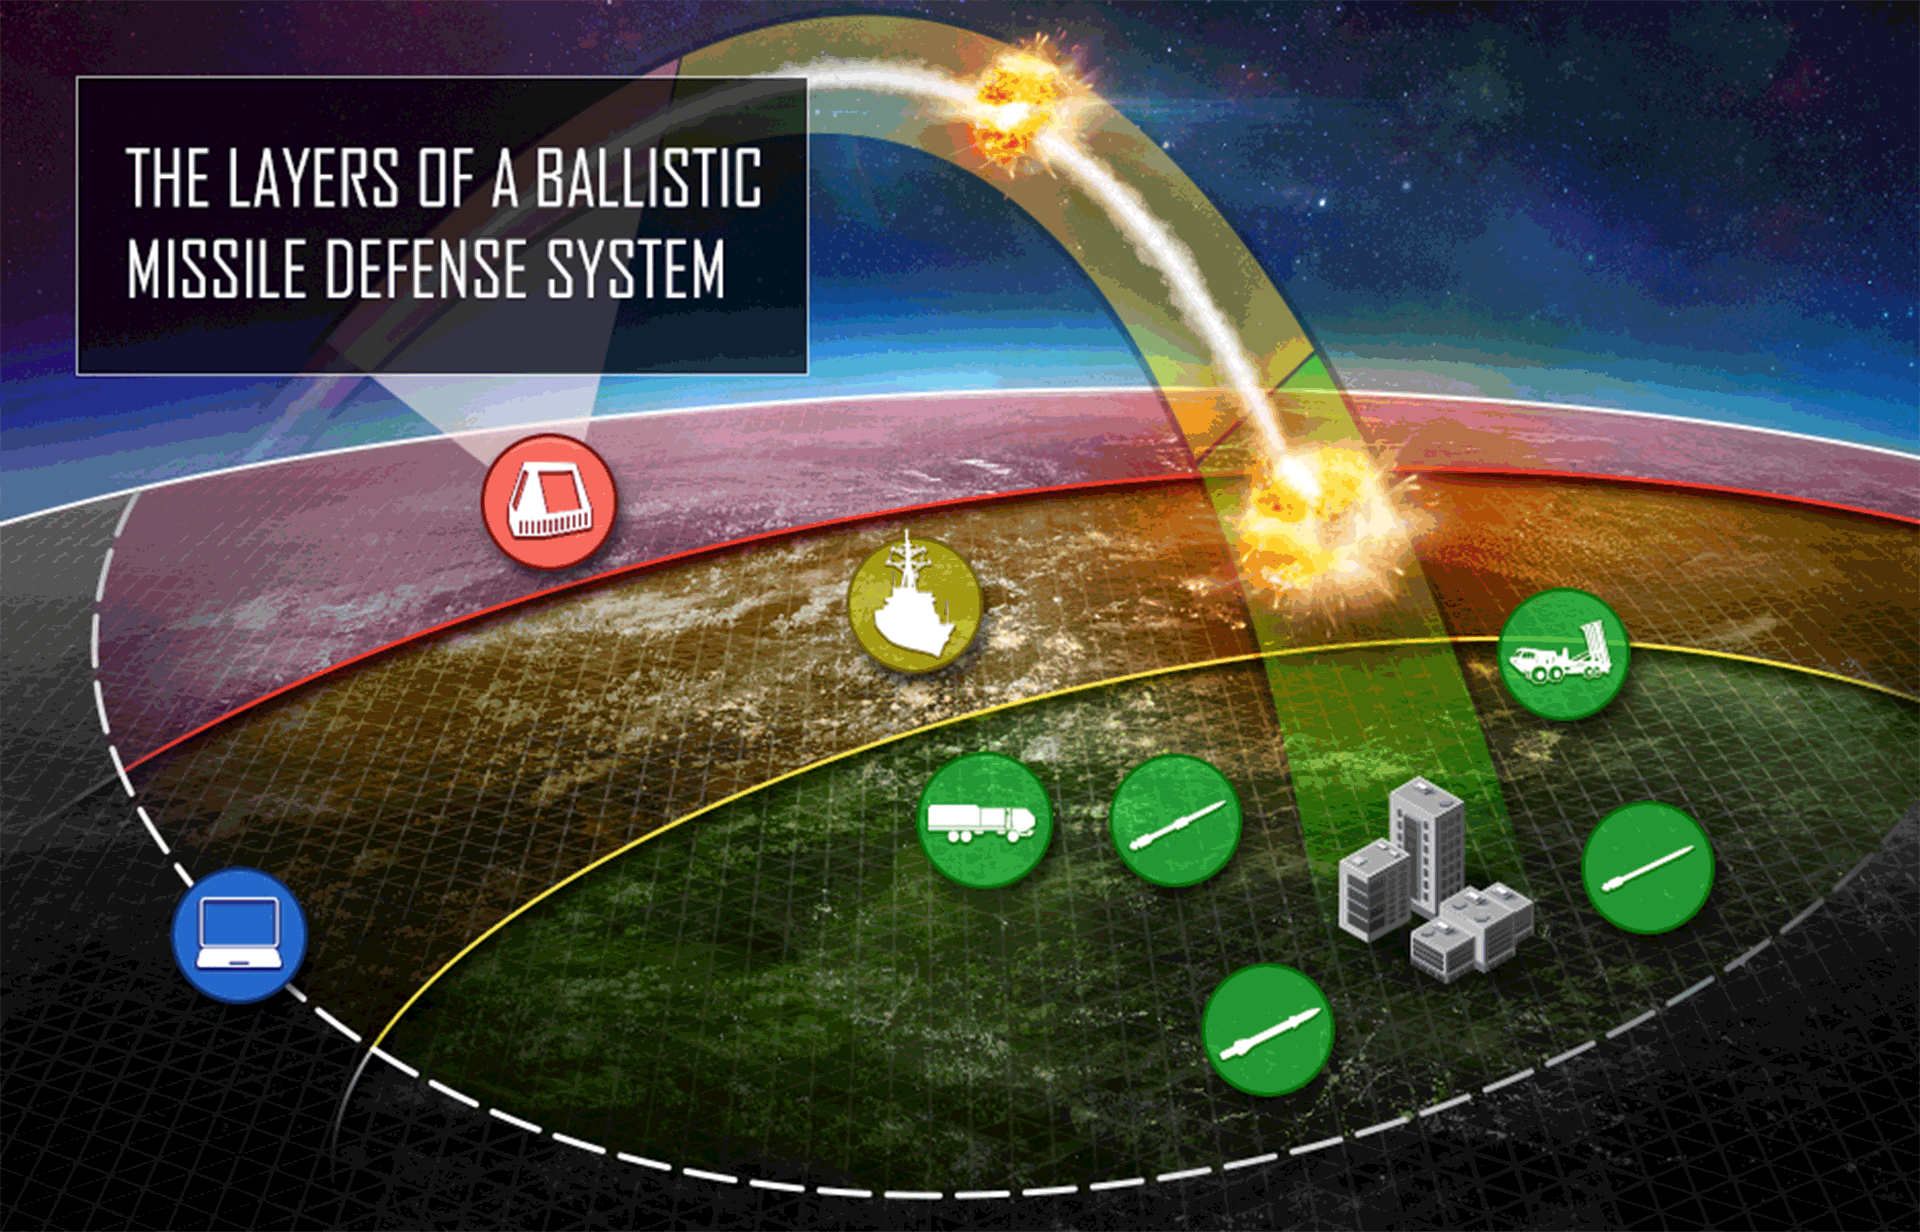 Command and Control Supports European Missile Defense | Lockheed Martin